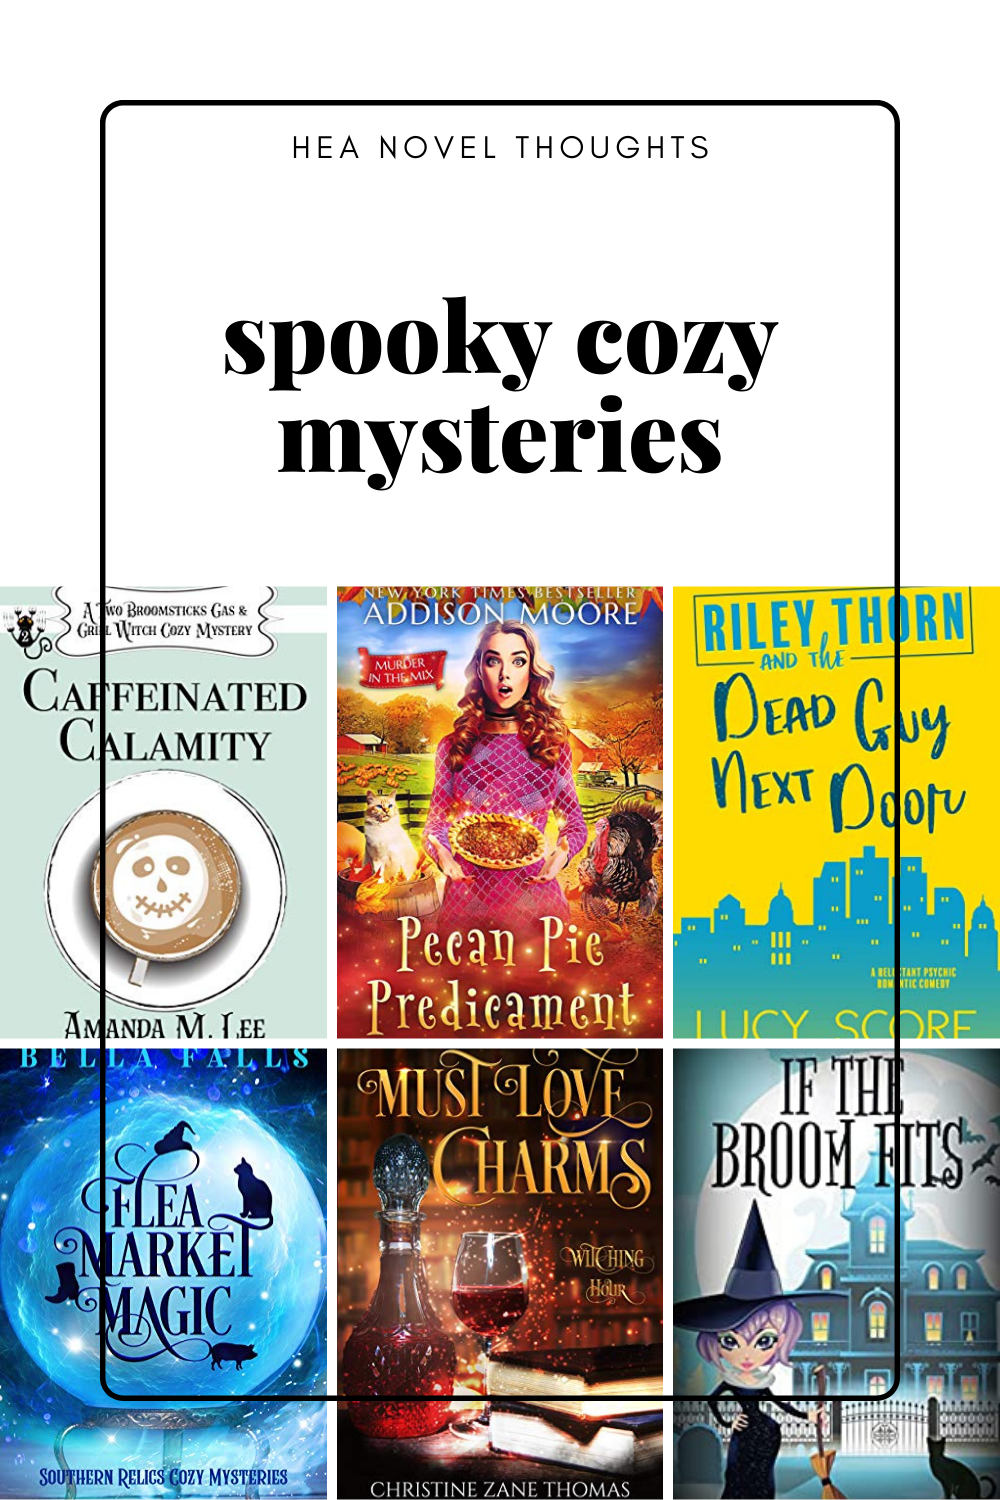 Cozy Mystery for Halloween!